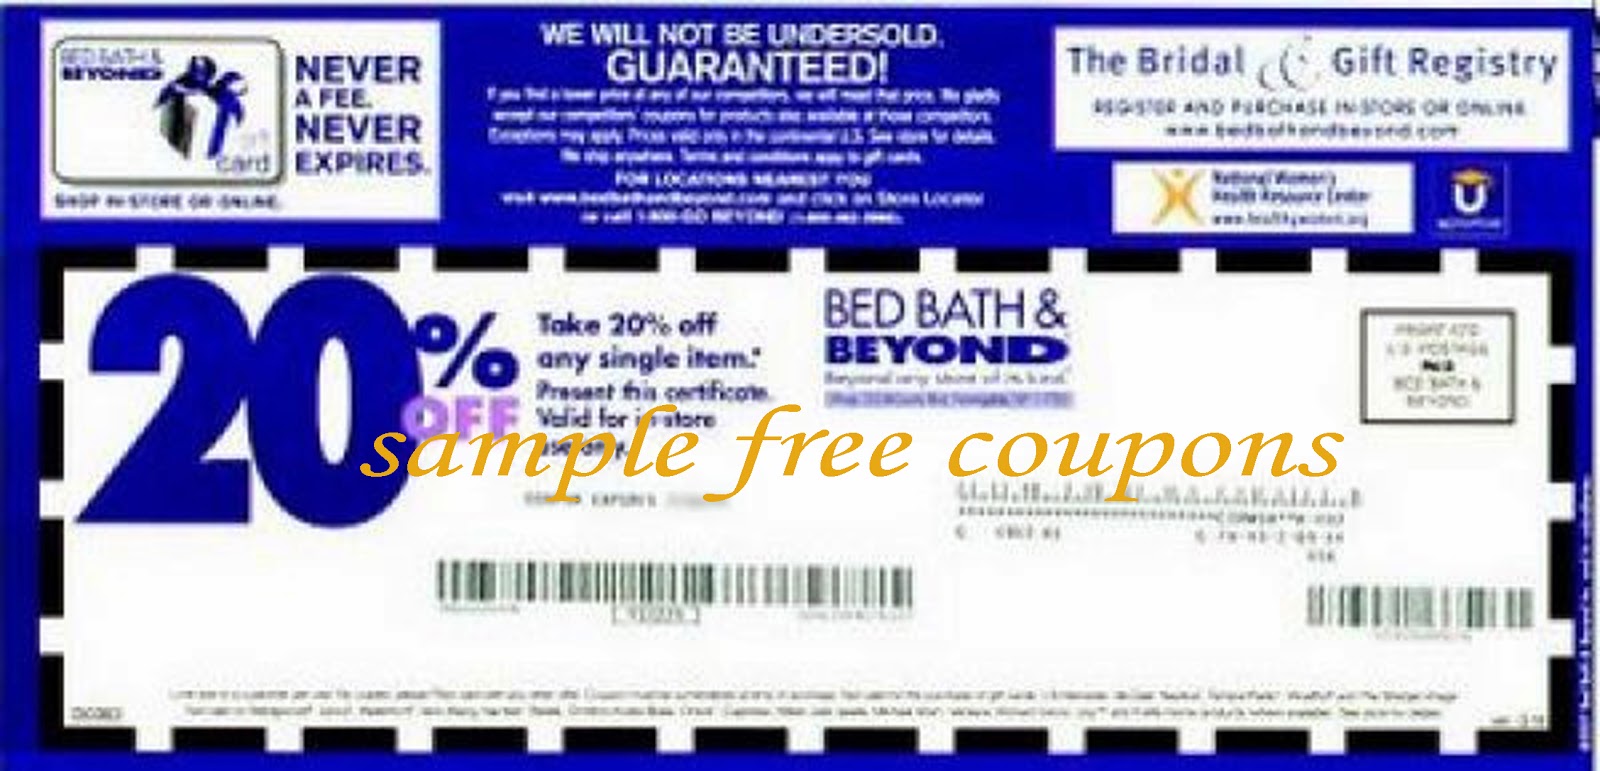 Bed+Bath+and+Beyond+Coupons+march+2014.jpg